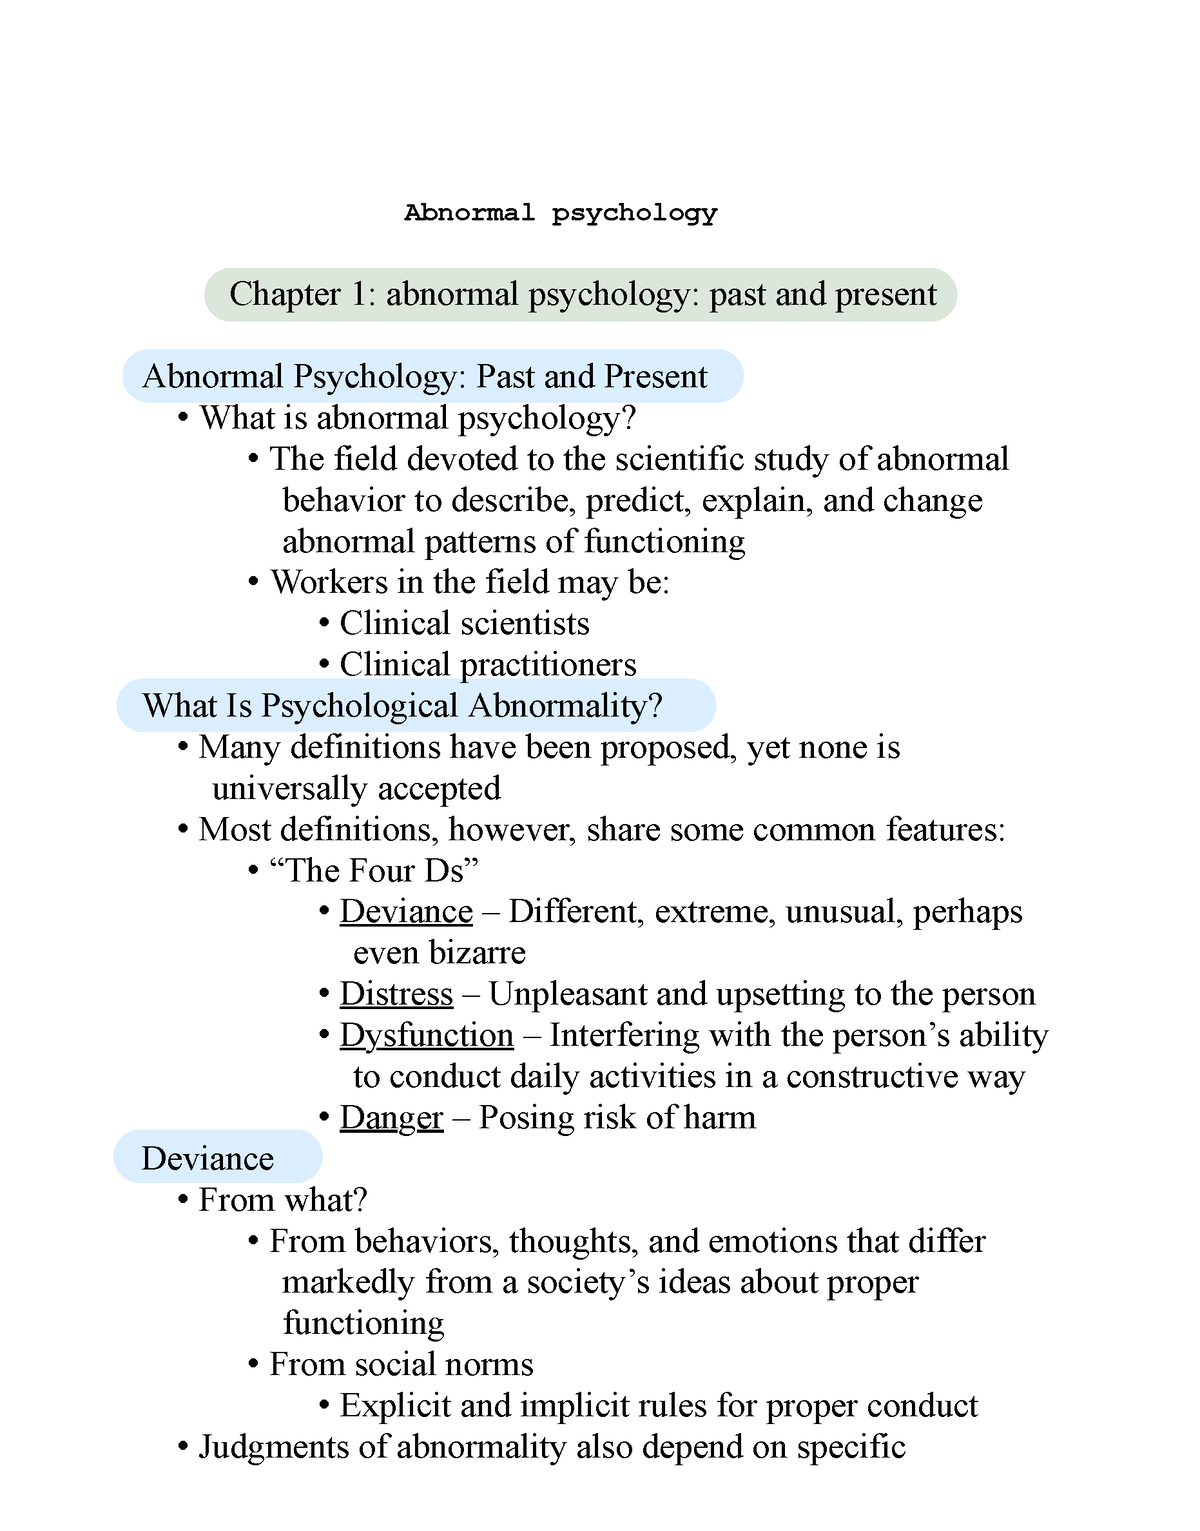 abnormal psychology essay questions